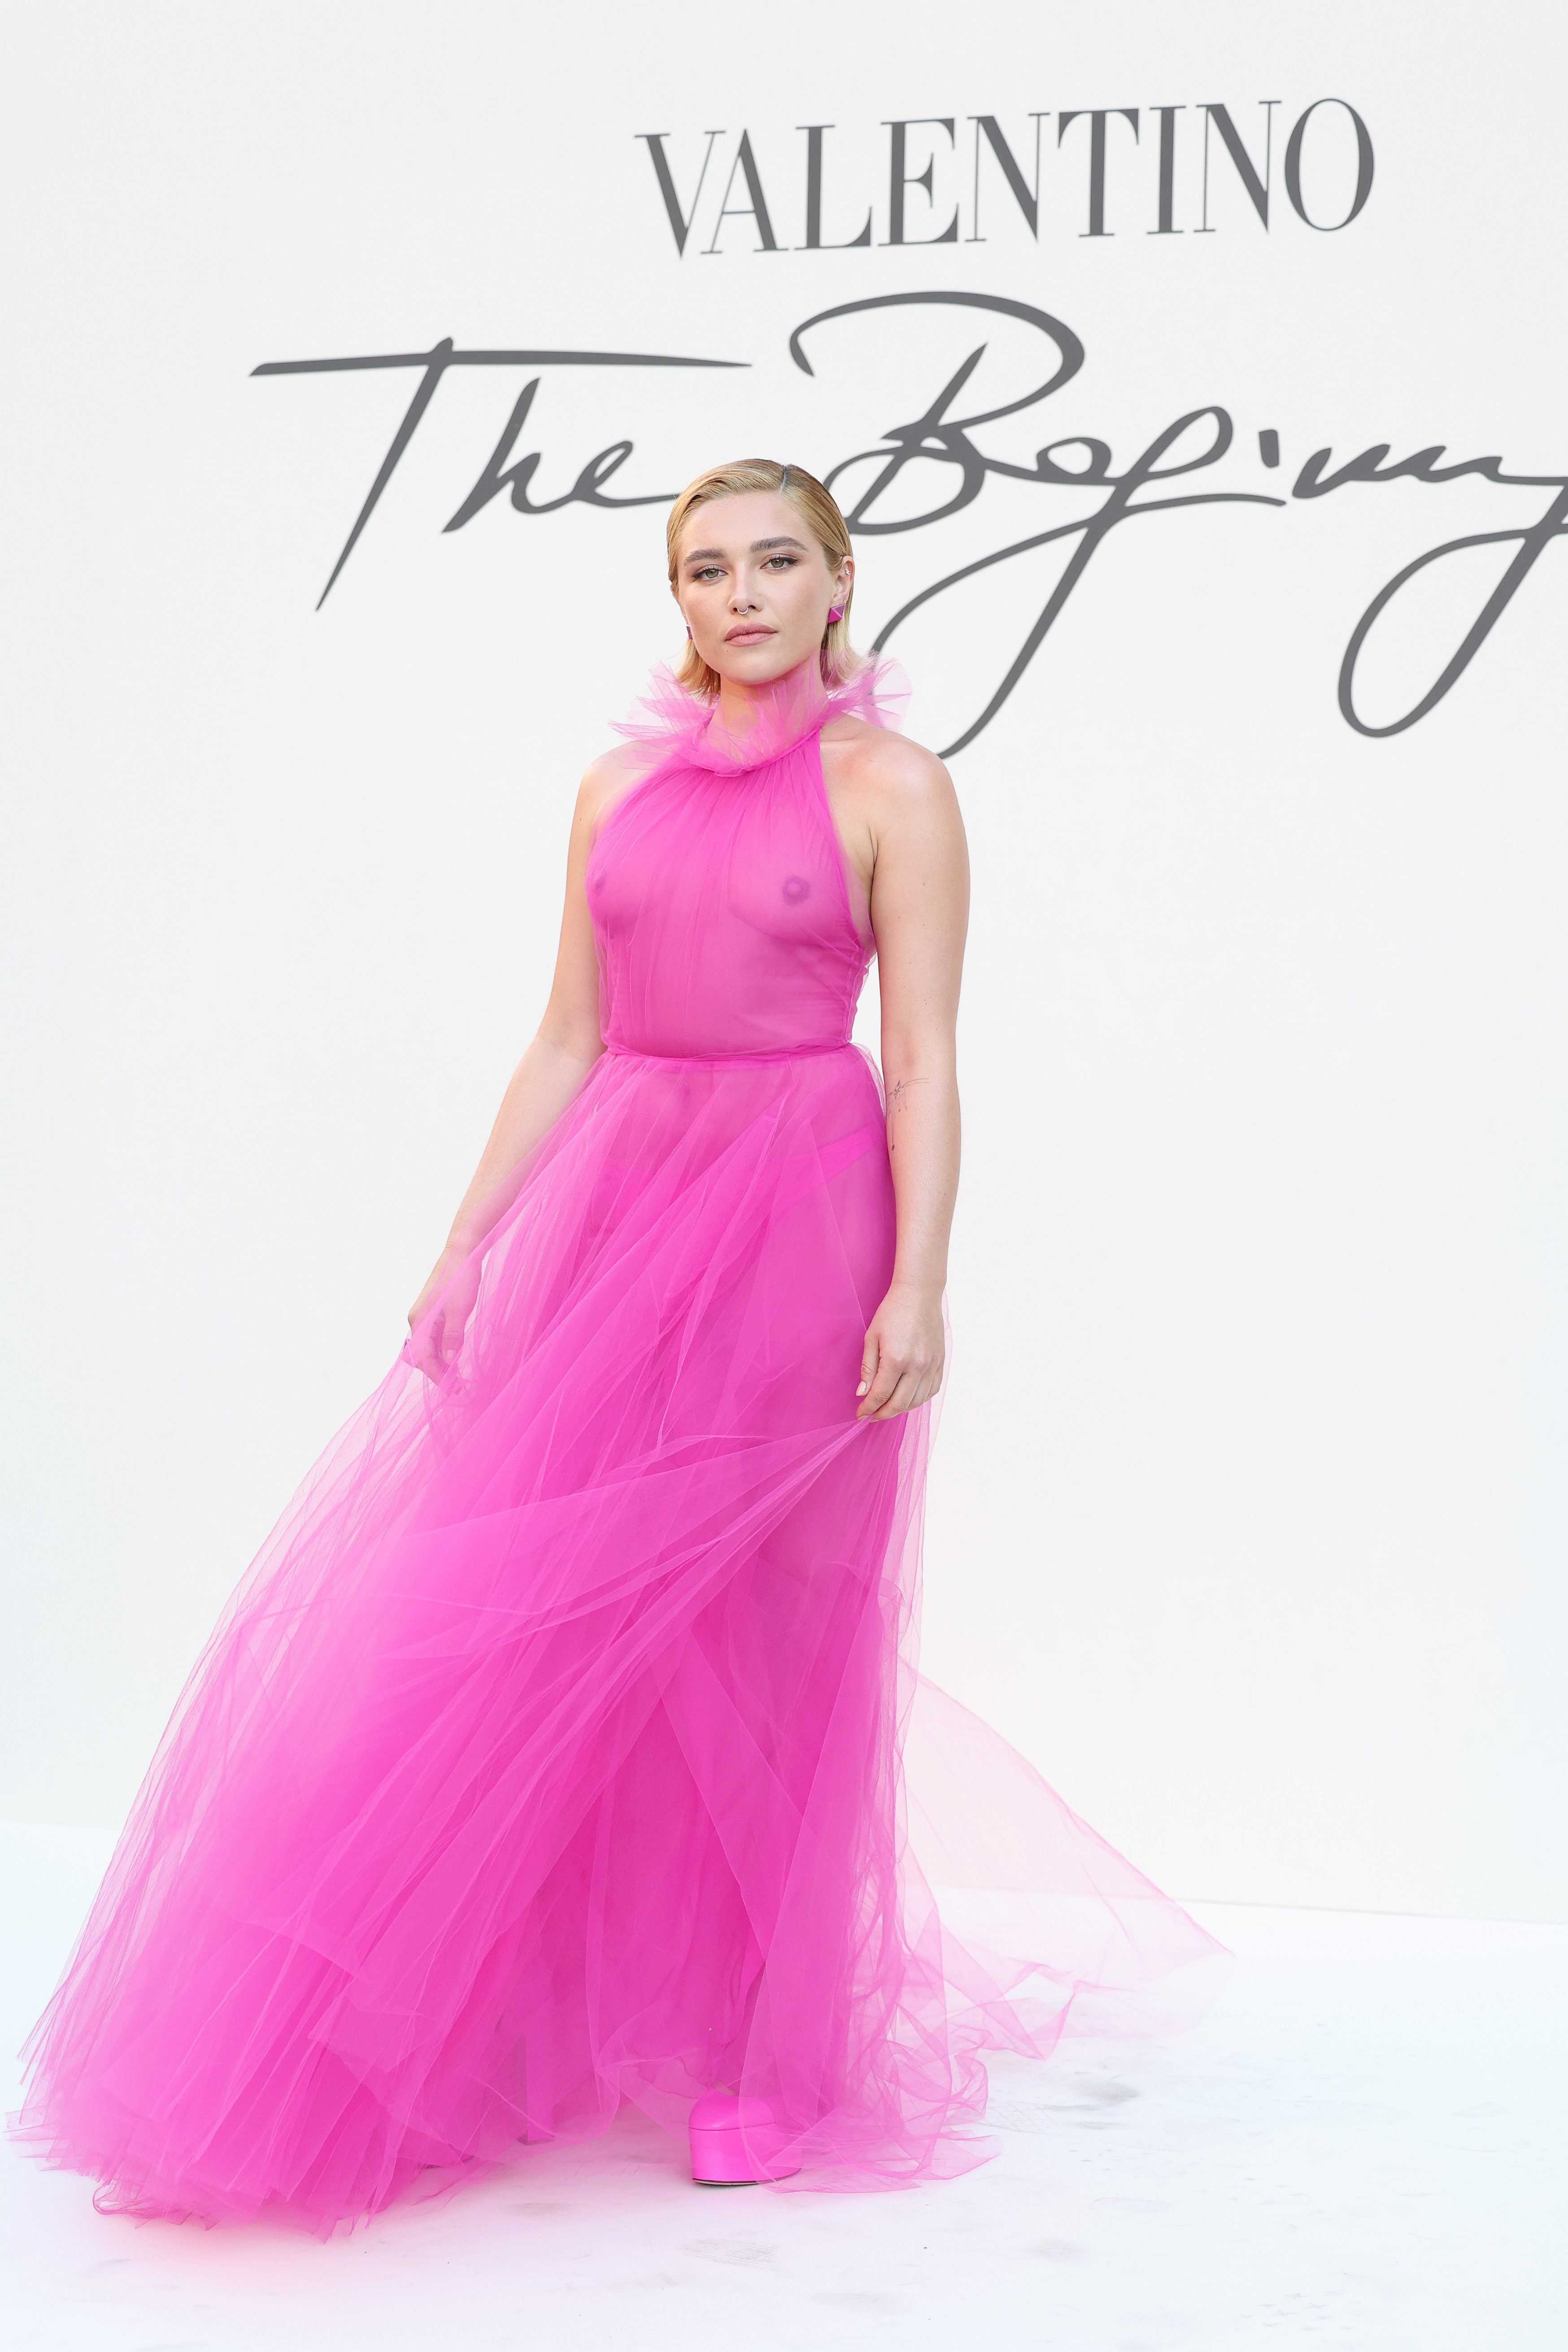 Florence Pugh at the Valentino Haute Couture fall-winter 22/23 show